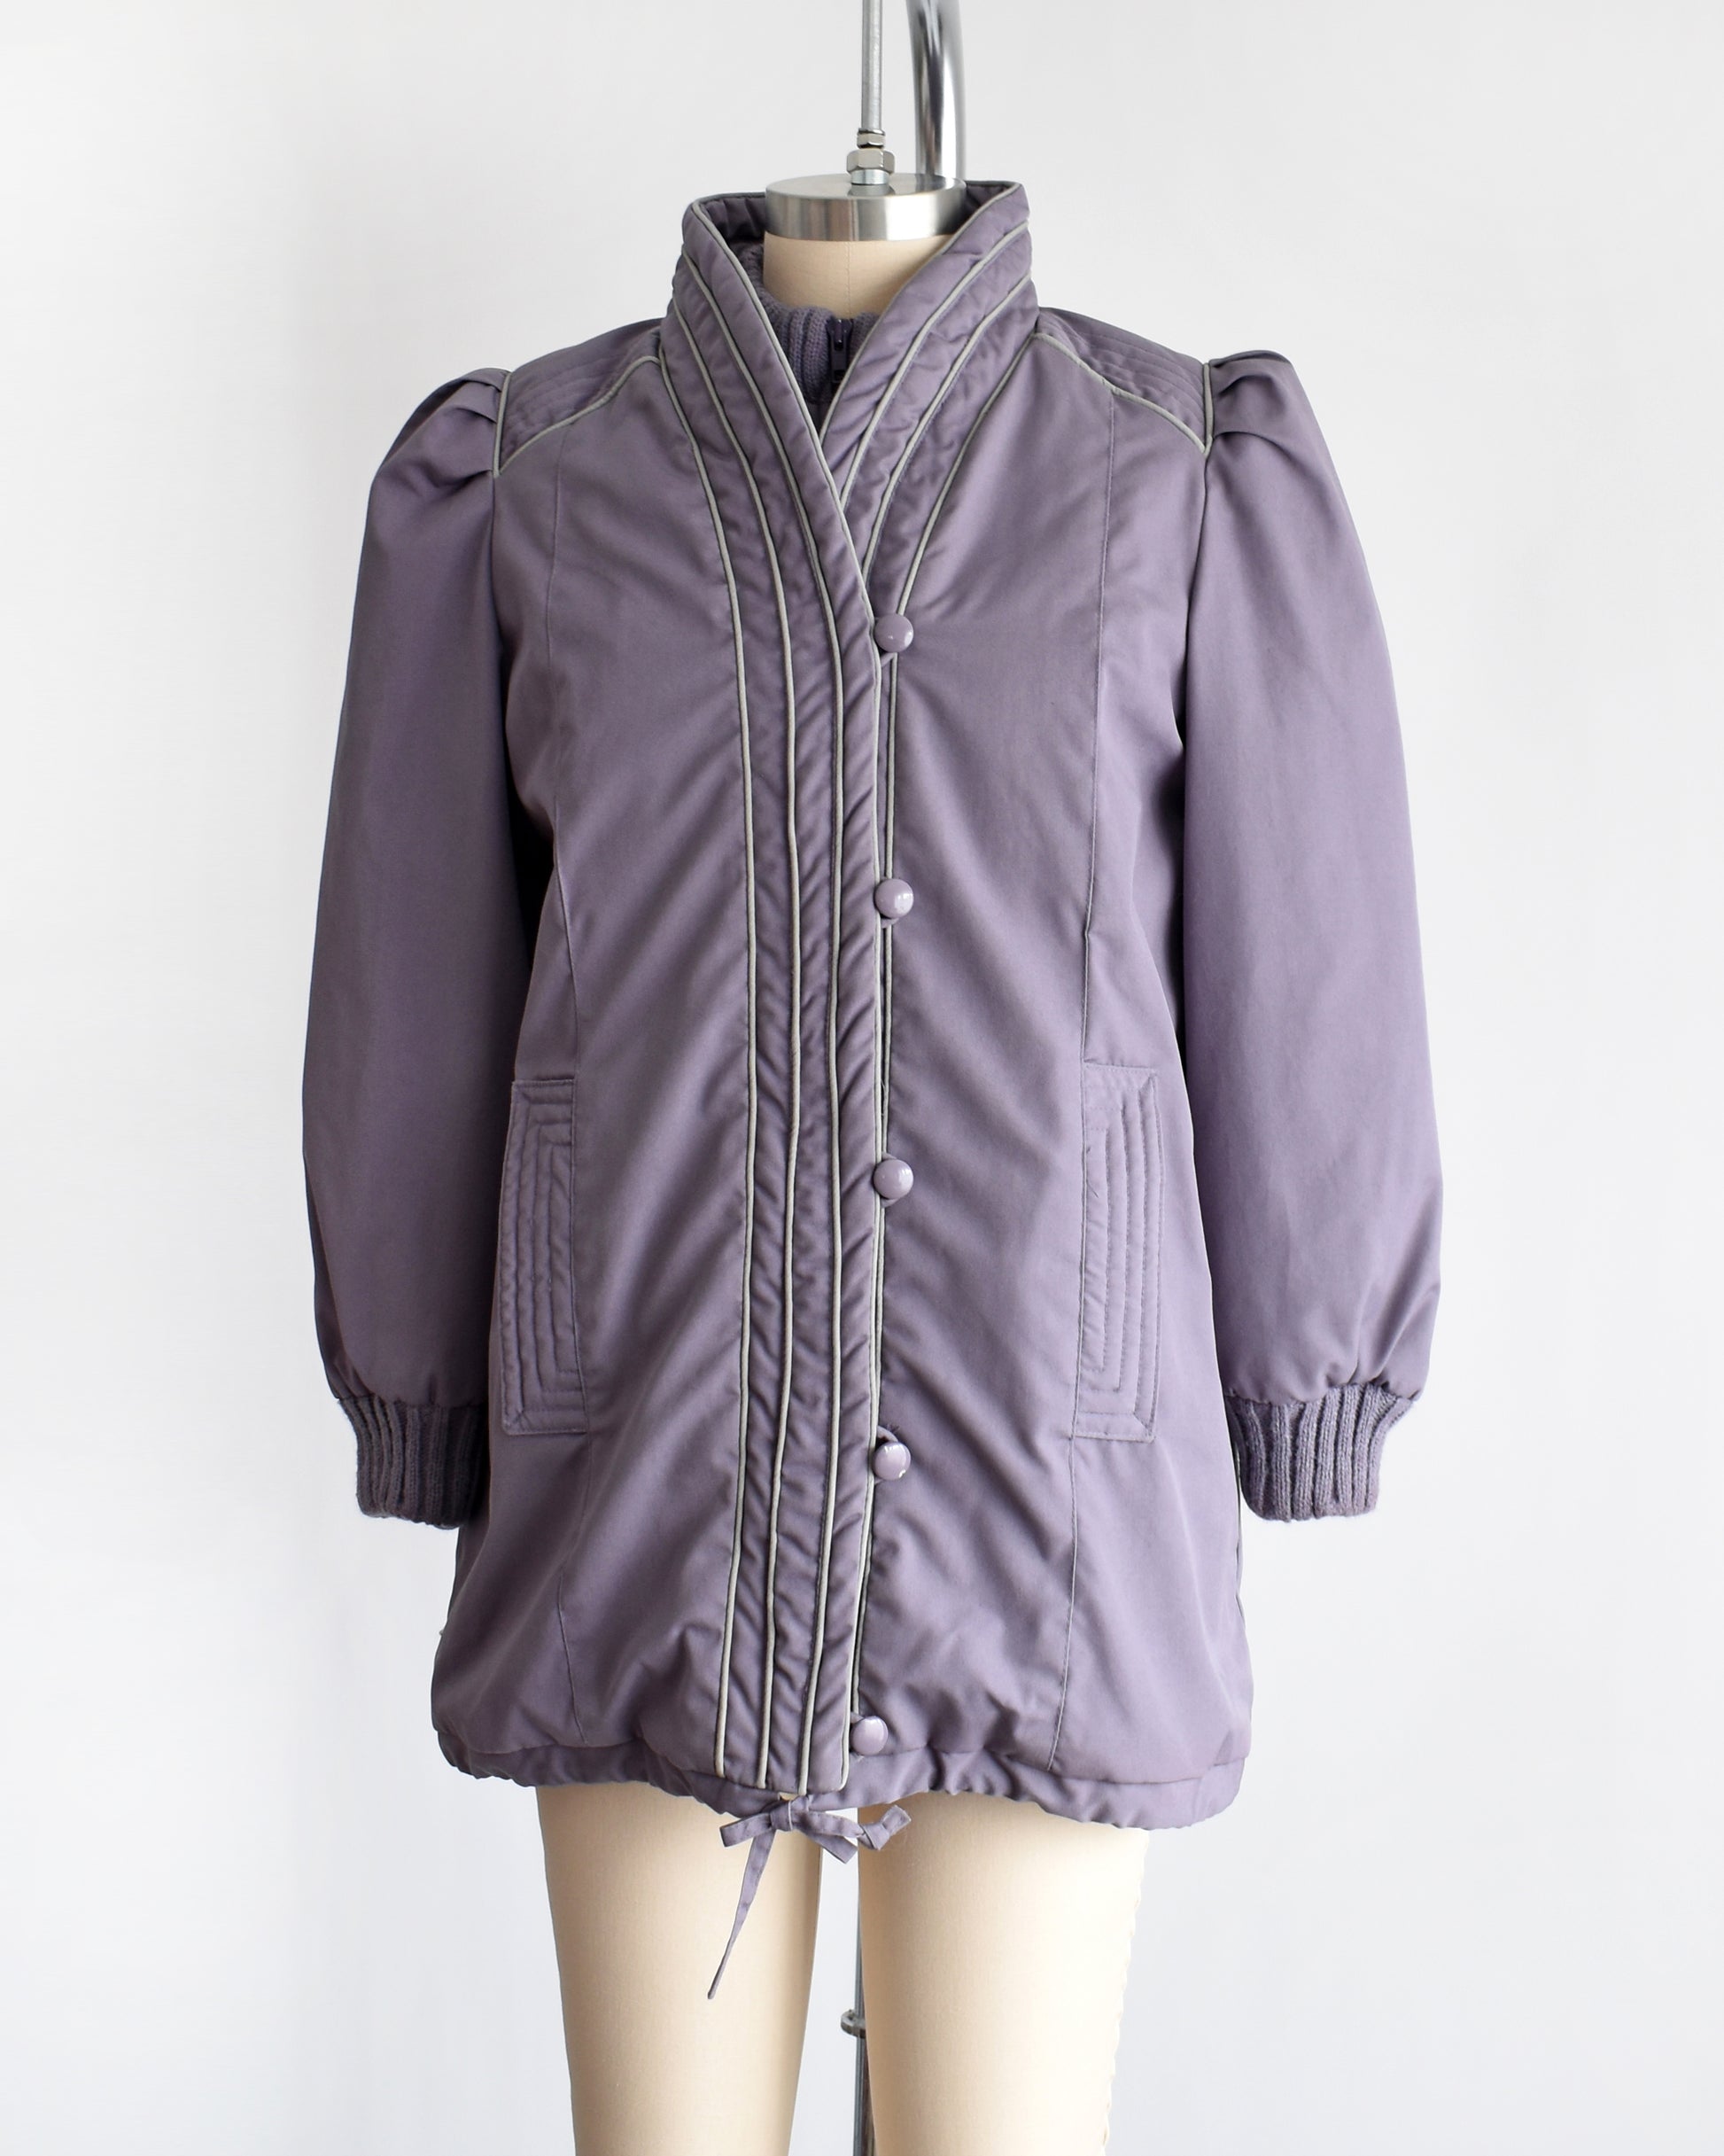 Side front view of a vintage 1980s purple puffy coat with shawl style collar with gray trim